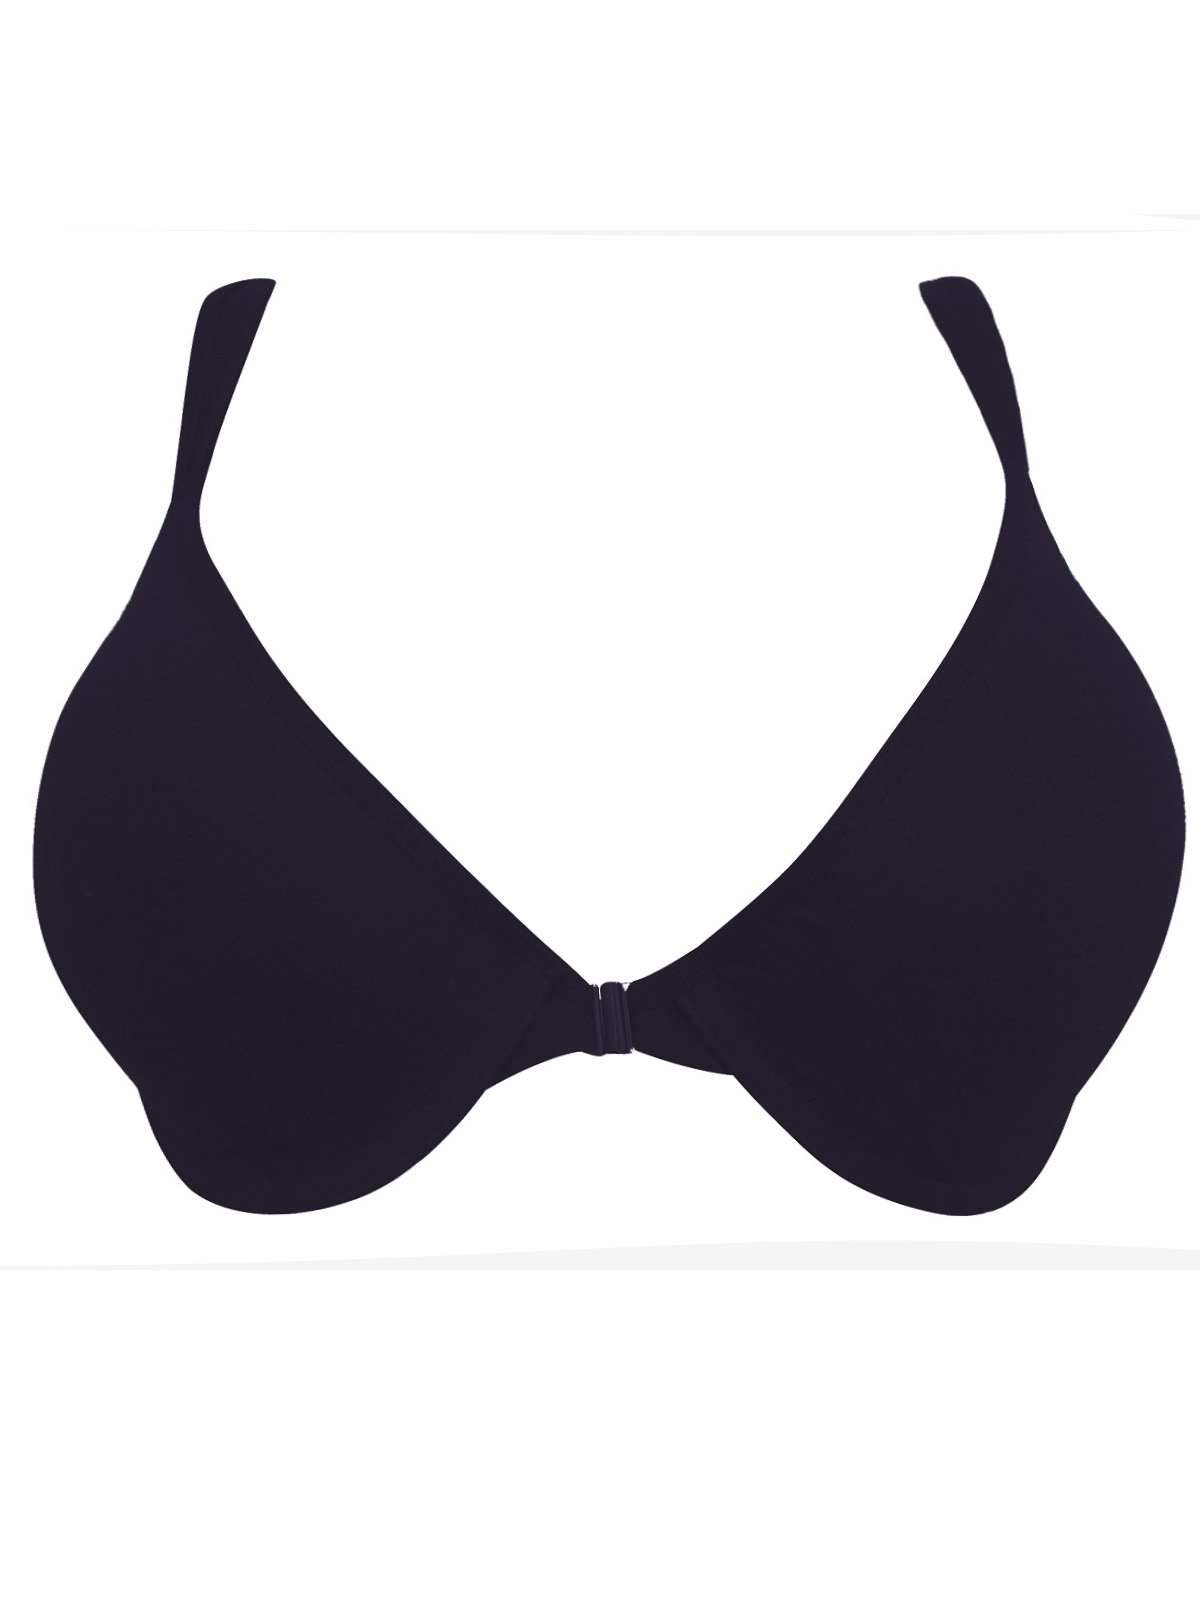 Fruits of the Loom - - Fruit of the Loom BLACK Padded & Wired Racerback Bra  - Size 34 to 38 (C-D)